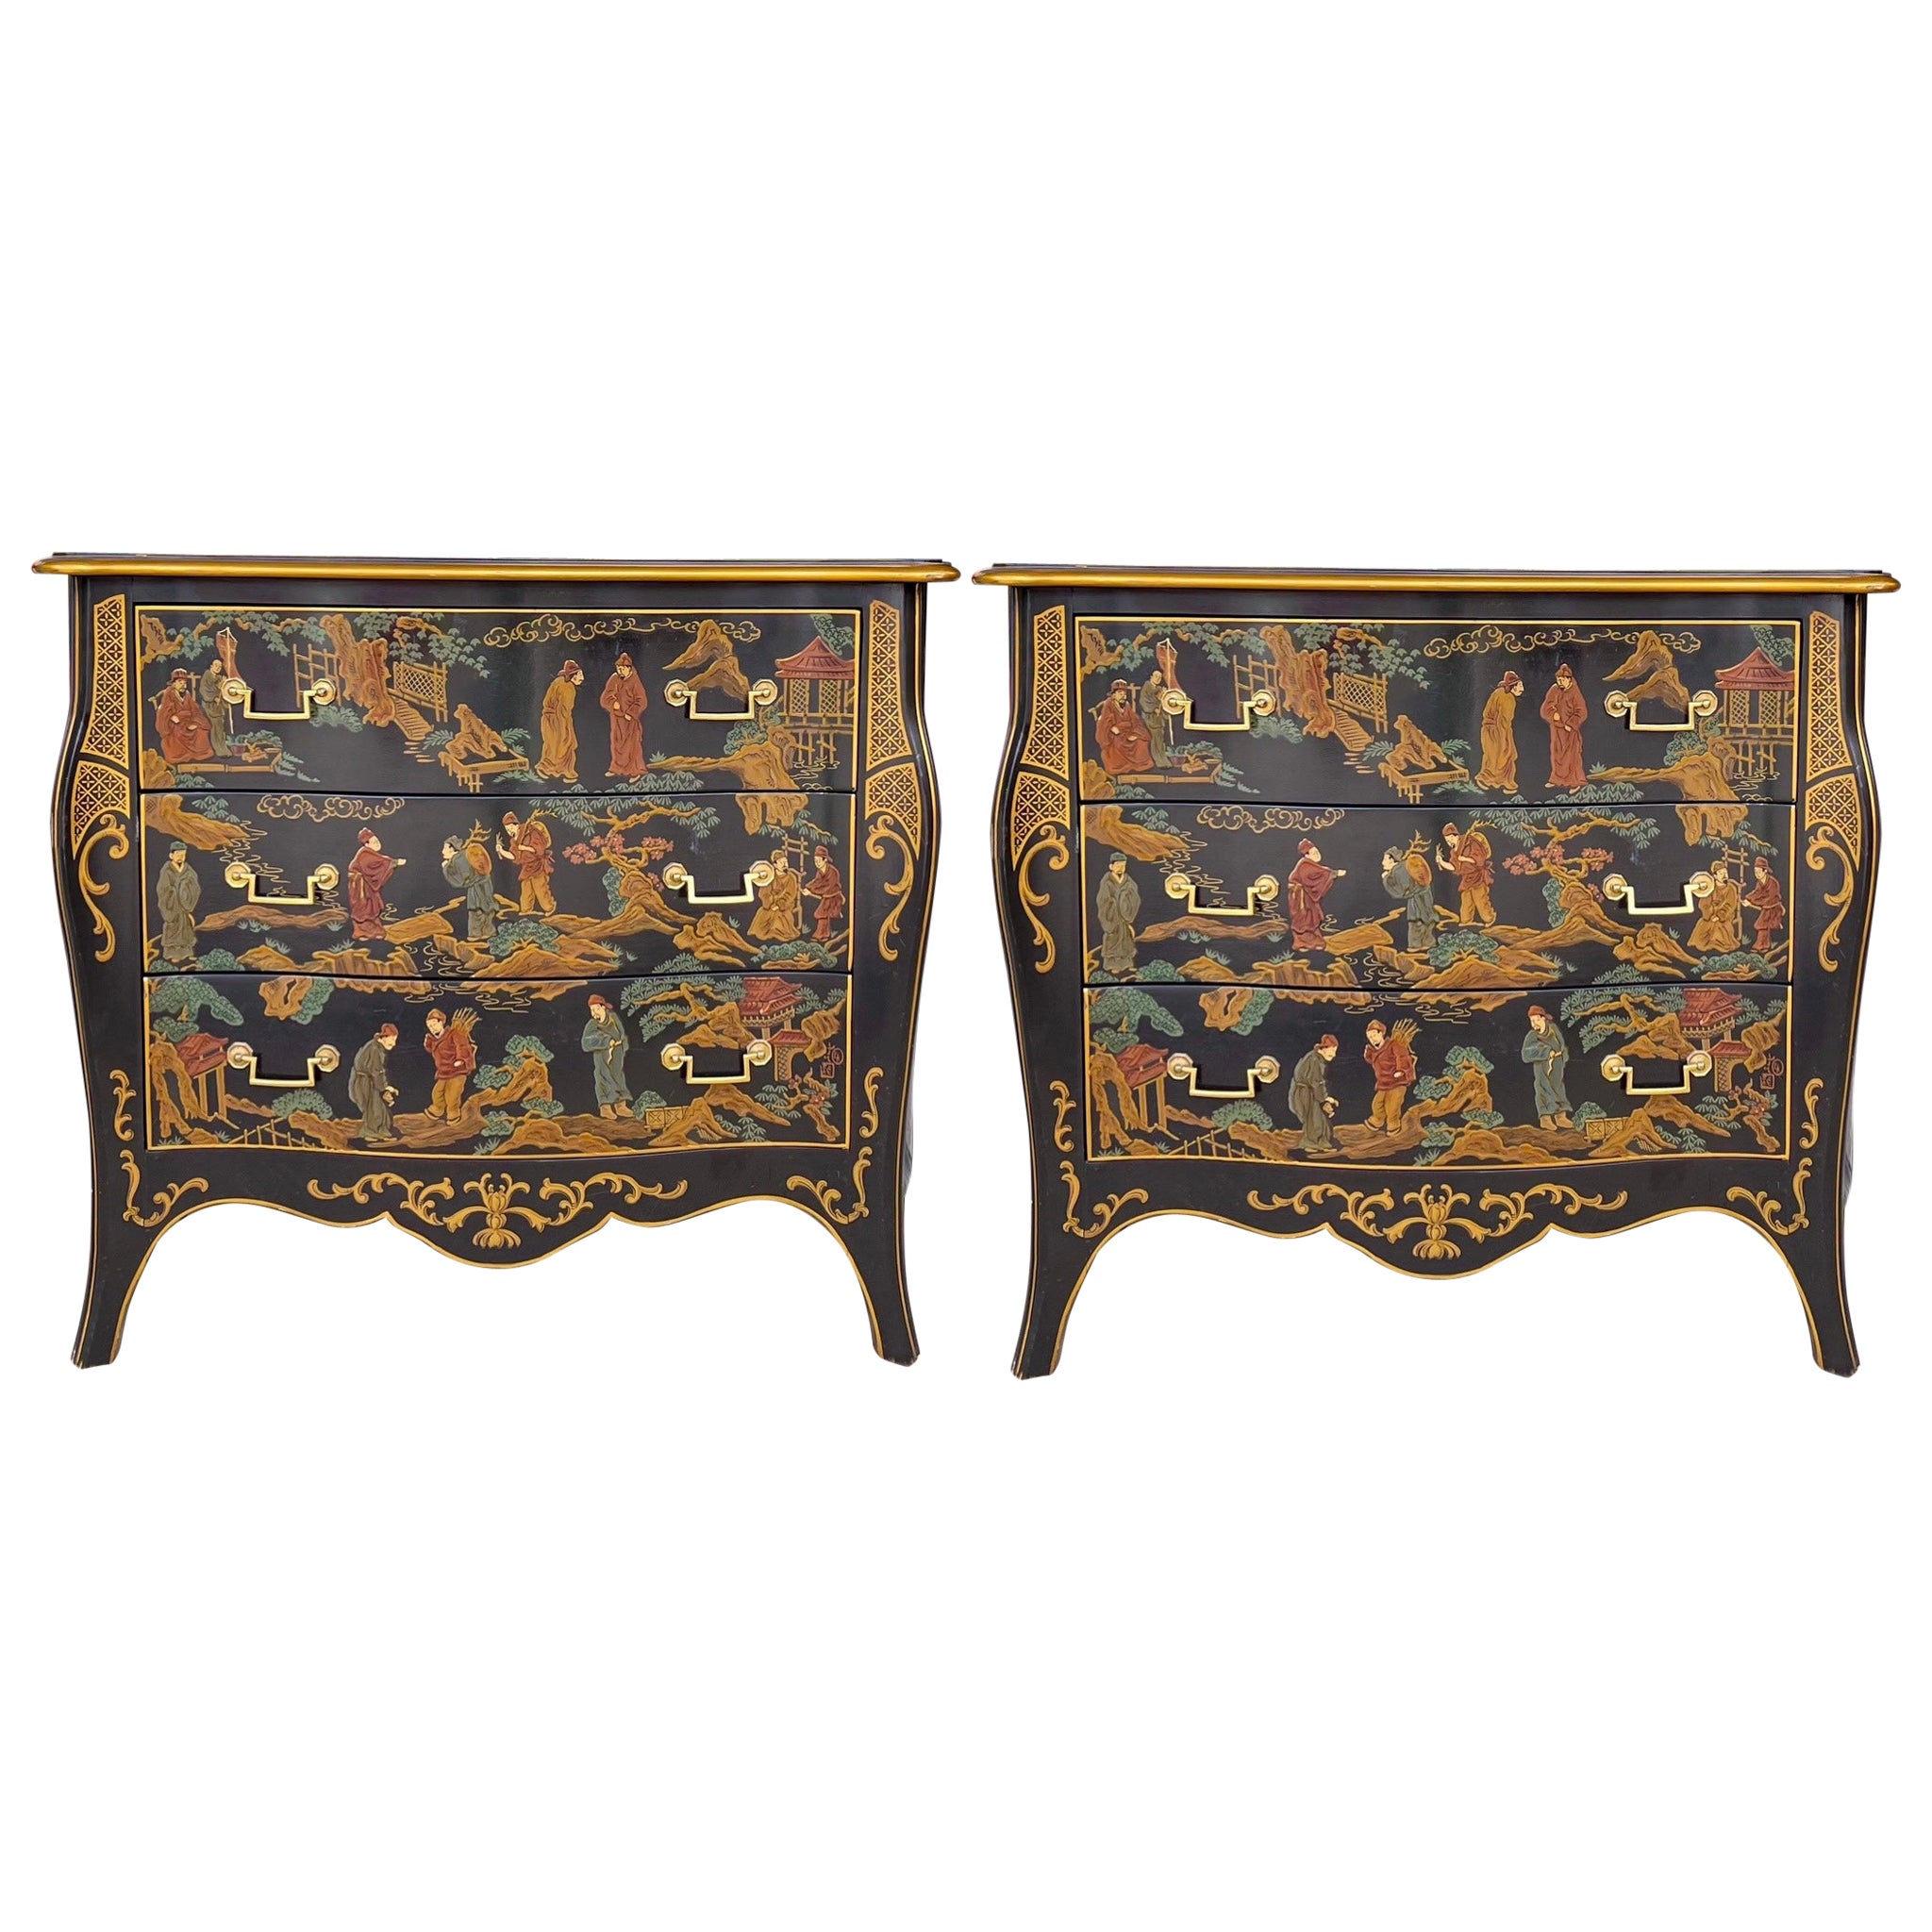 20th-C. Chinoiserie Serpentine Black and Gilt Chest of Drawers by Drexel, Pair